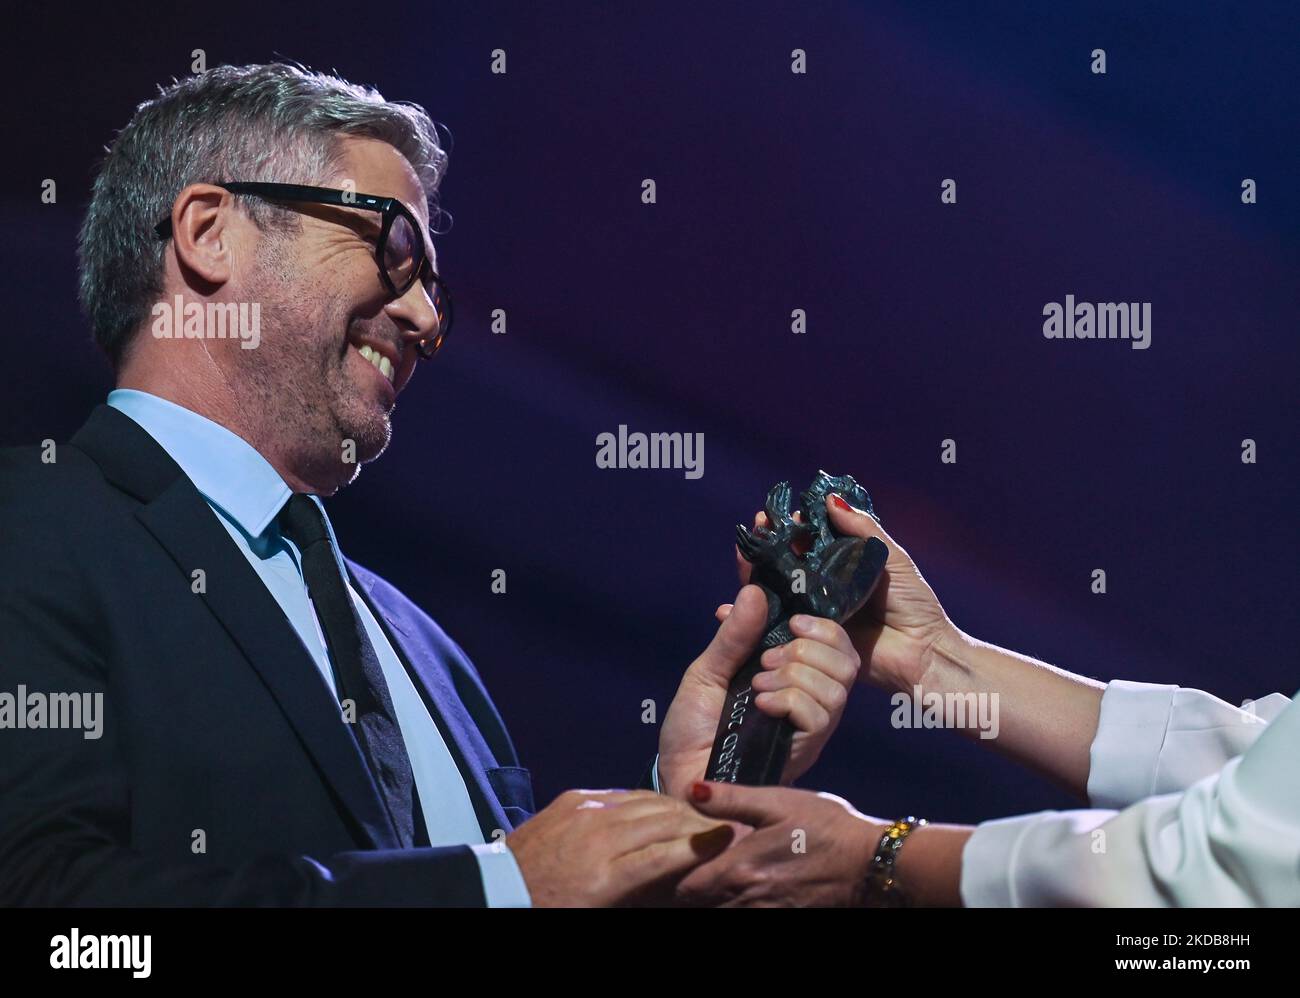 John Powell, an Anglo-American composer, best known for his music for animated films, receives the Wojciech Kilar Award for lifetime achievement at a gala at the ICE Krakow Congress Center. On Saturday, May 28, 2022, in Krakow, Poland. (Photo by Artur Widak/NurPhoto) Stock Photo